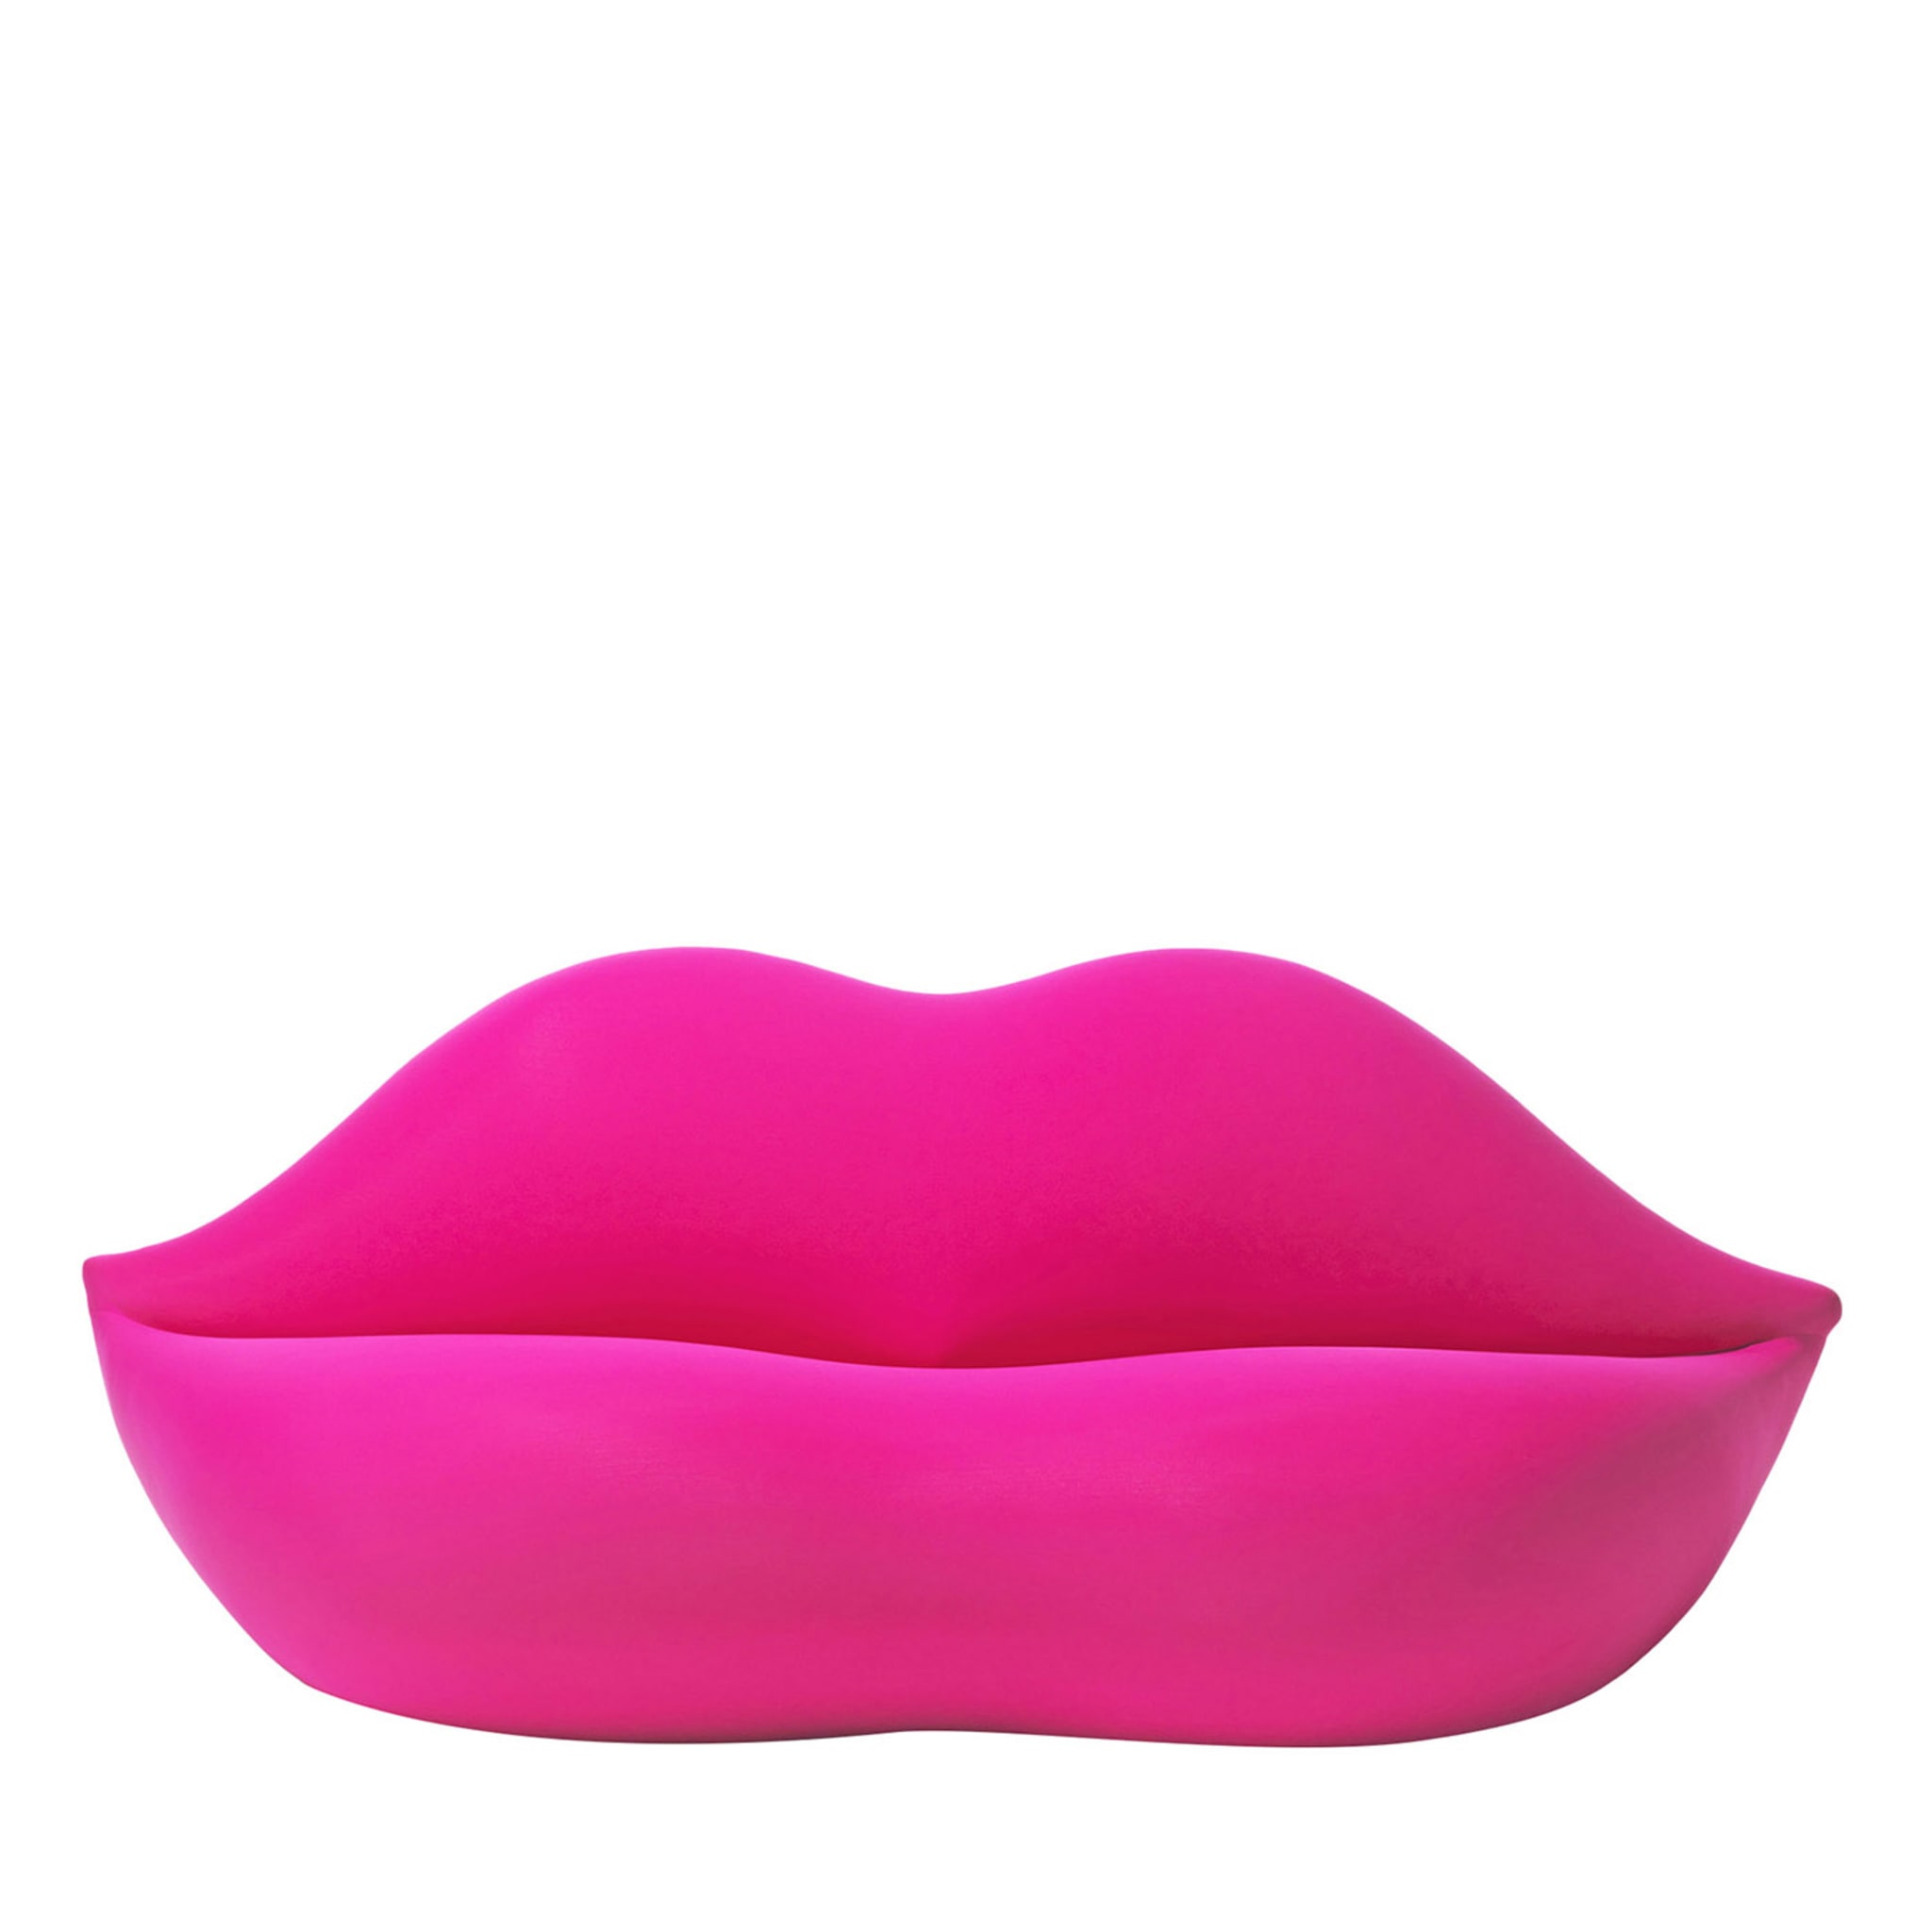 Bocca Pink Lady Limited Edition Sofa by Studio 65